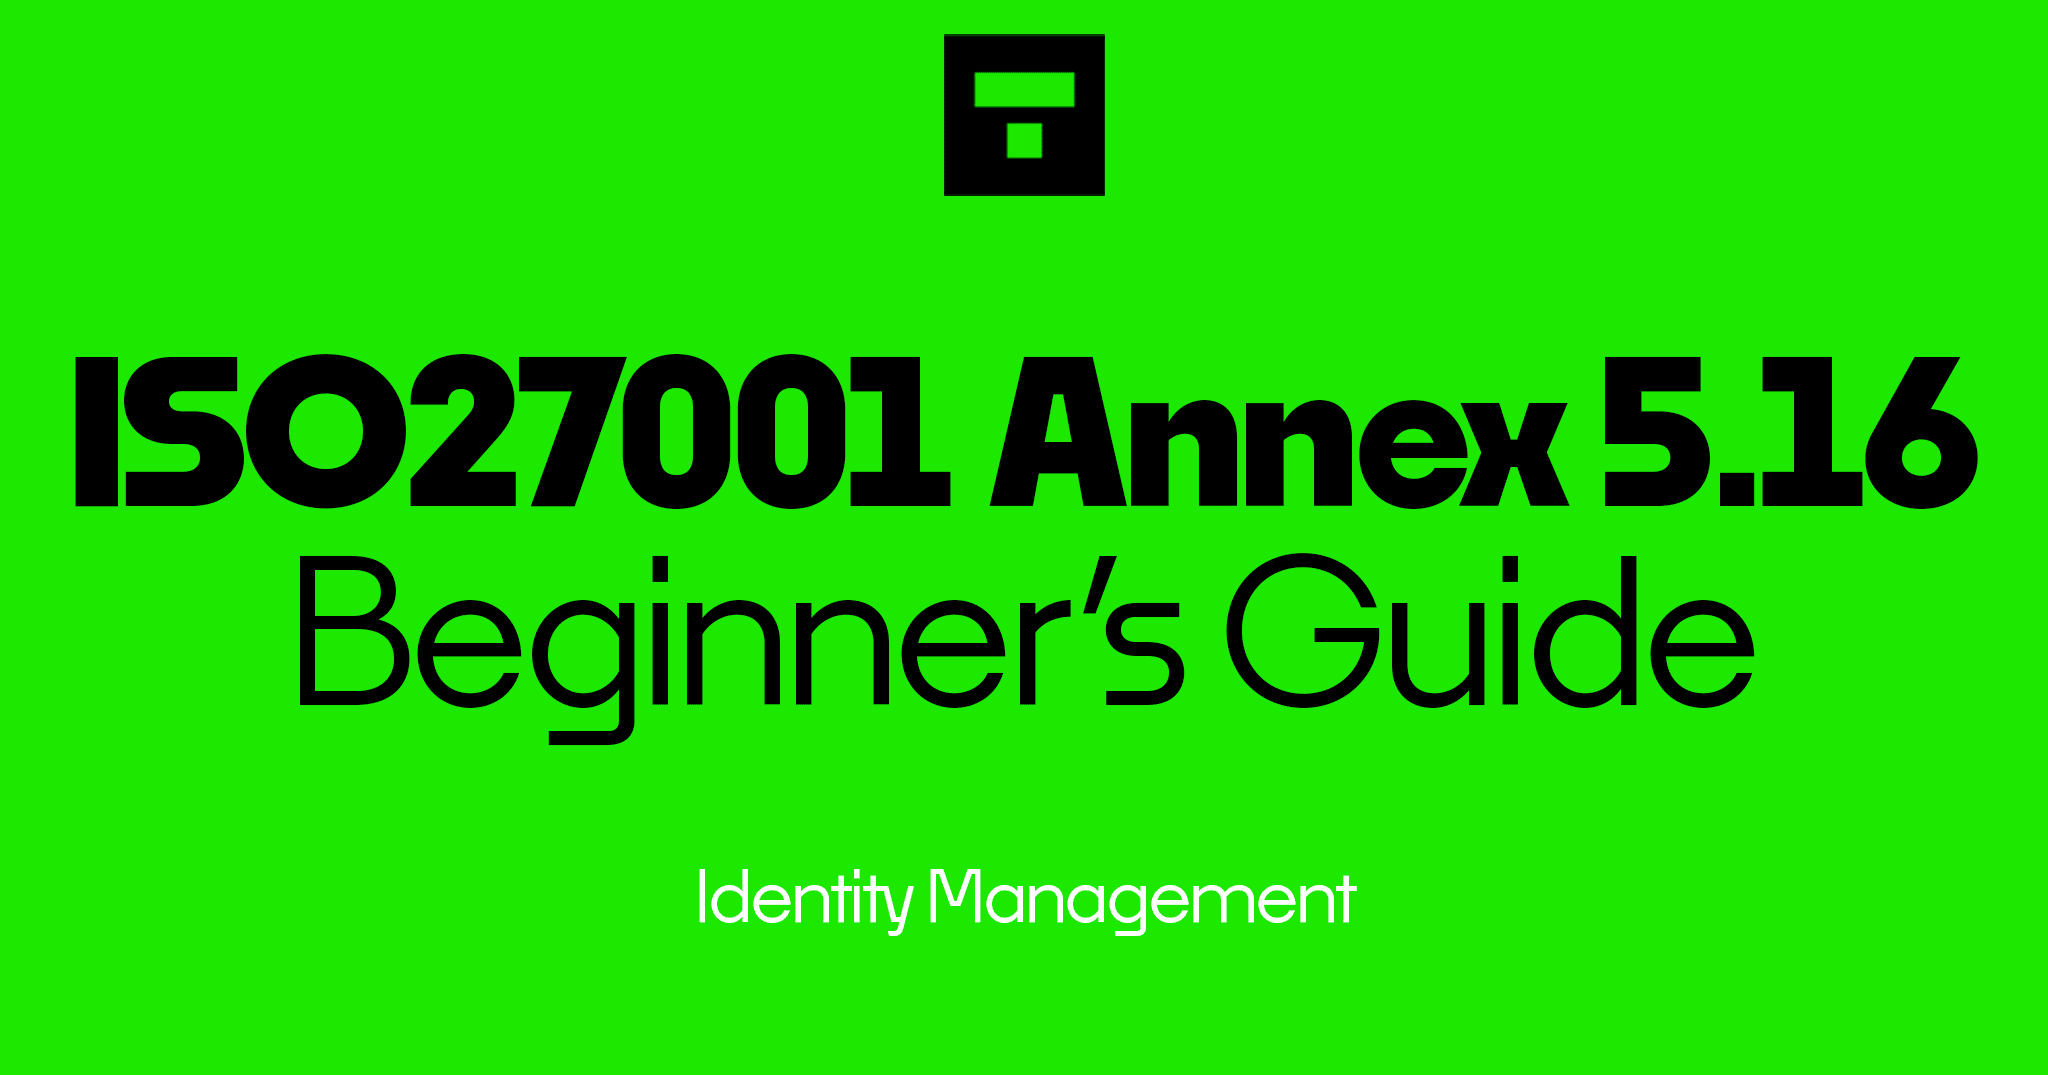 How To Implement ISO 27001 Annex A 5.16 Identity Management